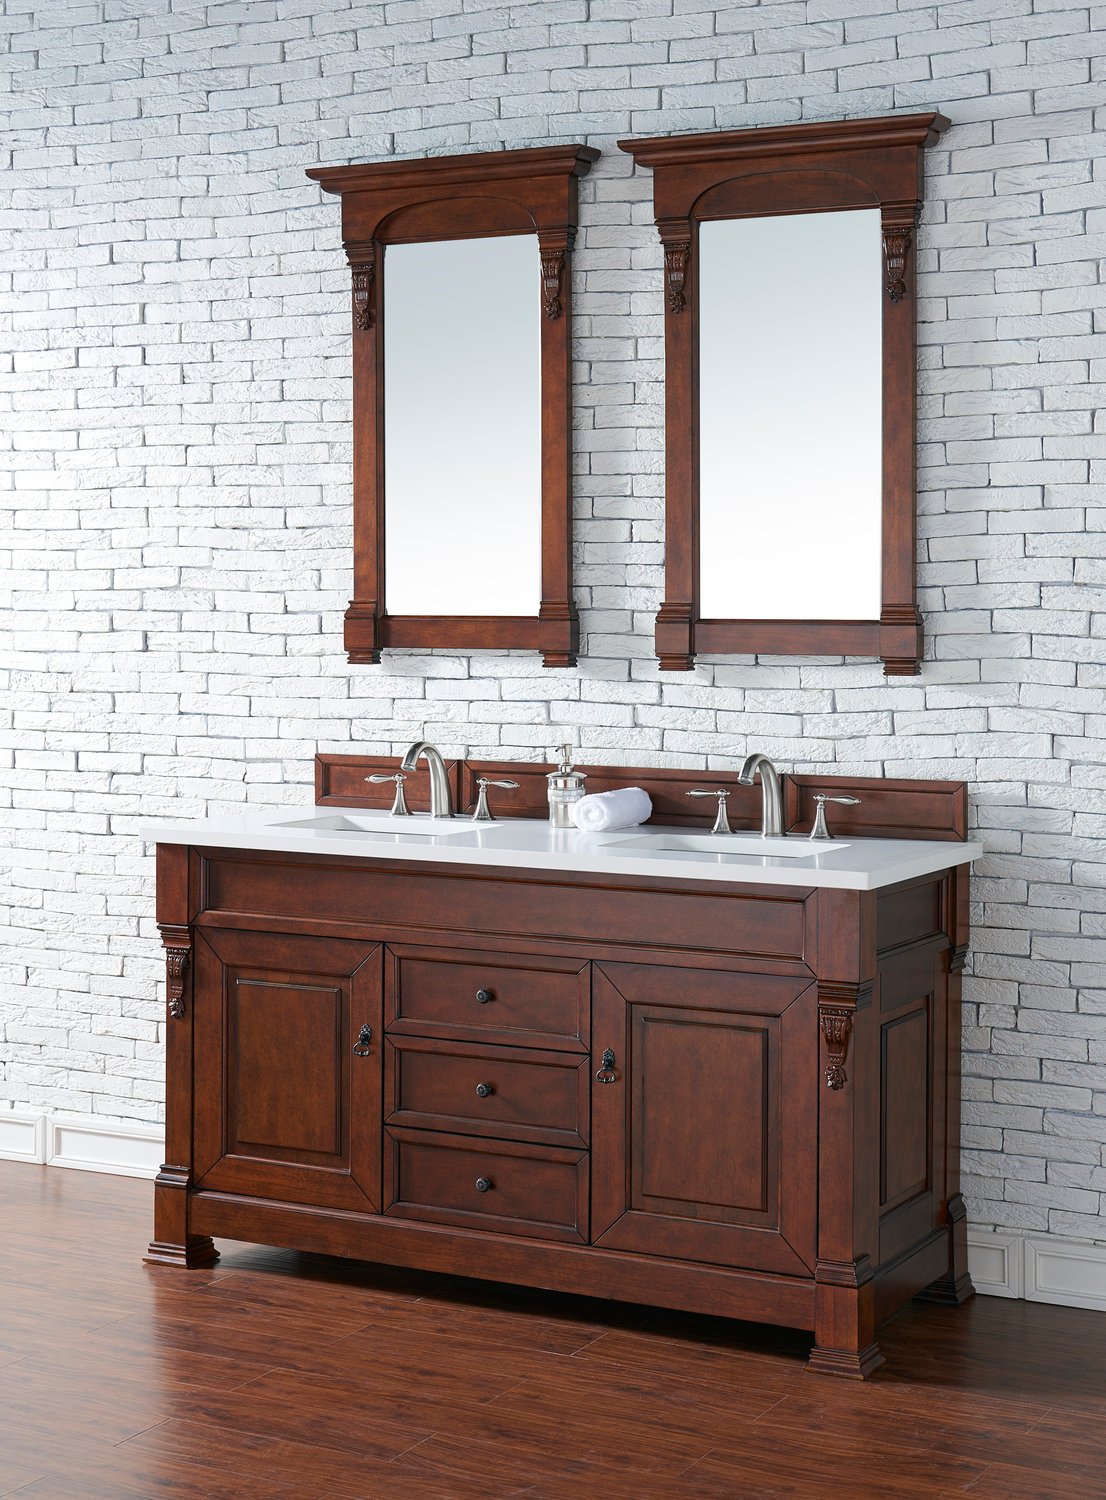 toilet with cupboard James Martin Vanity Warm Cherry Transitional